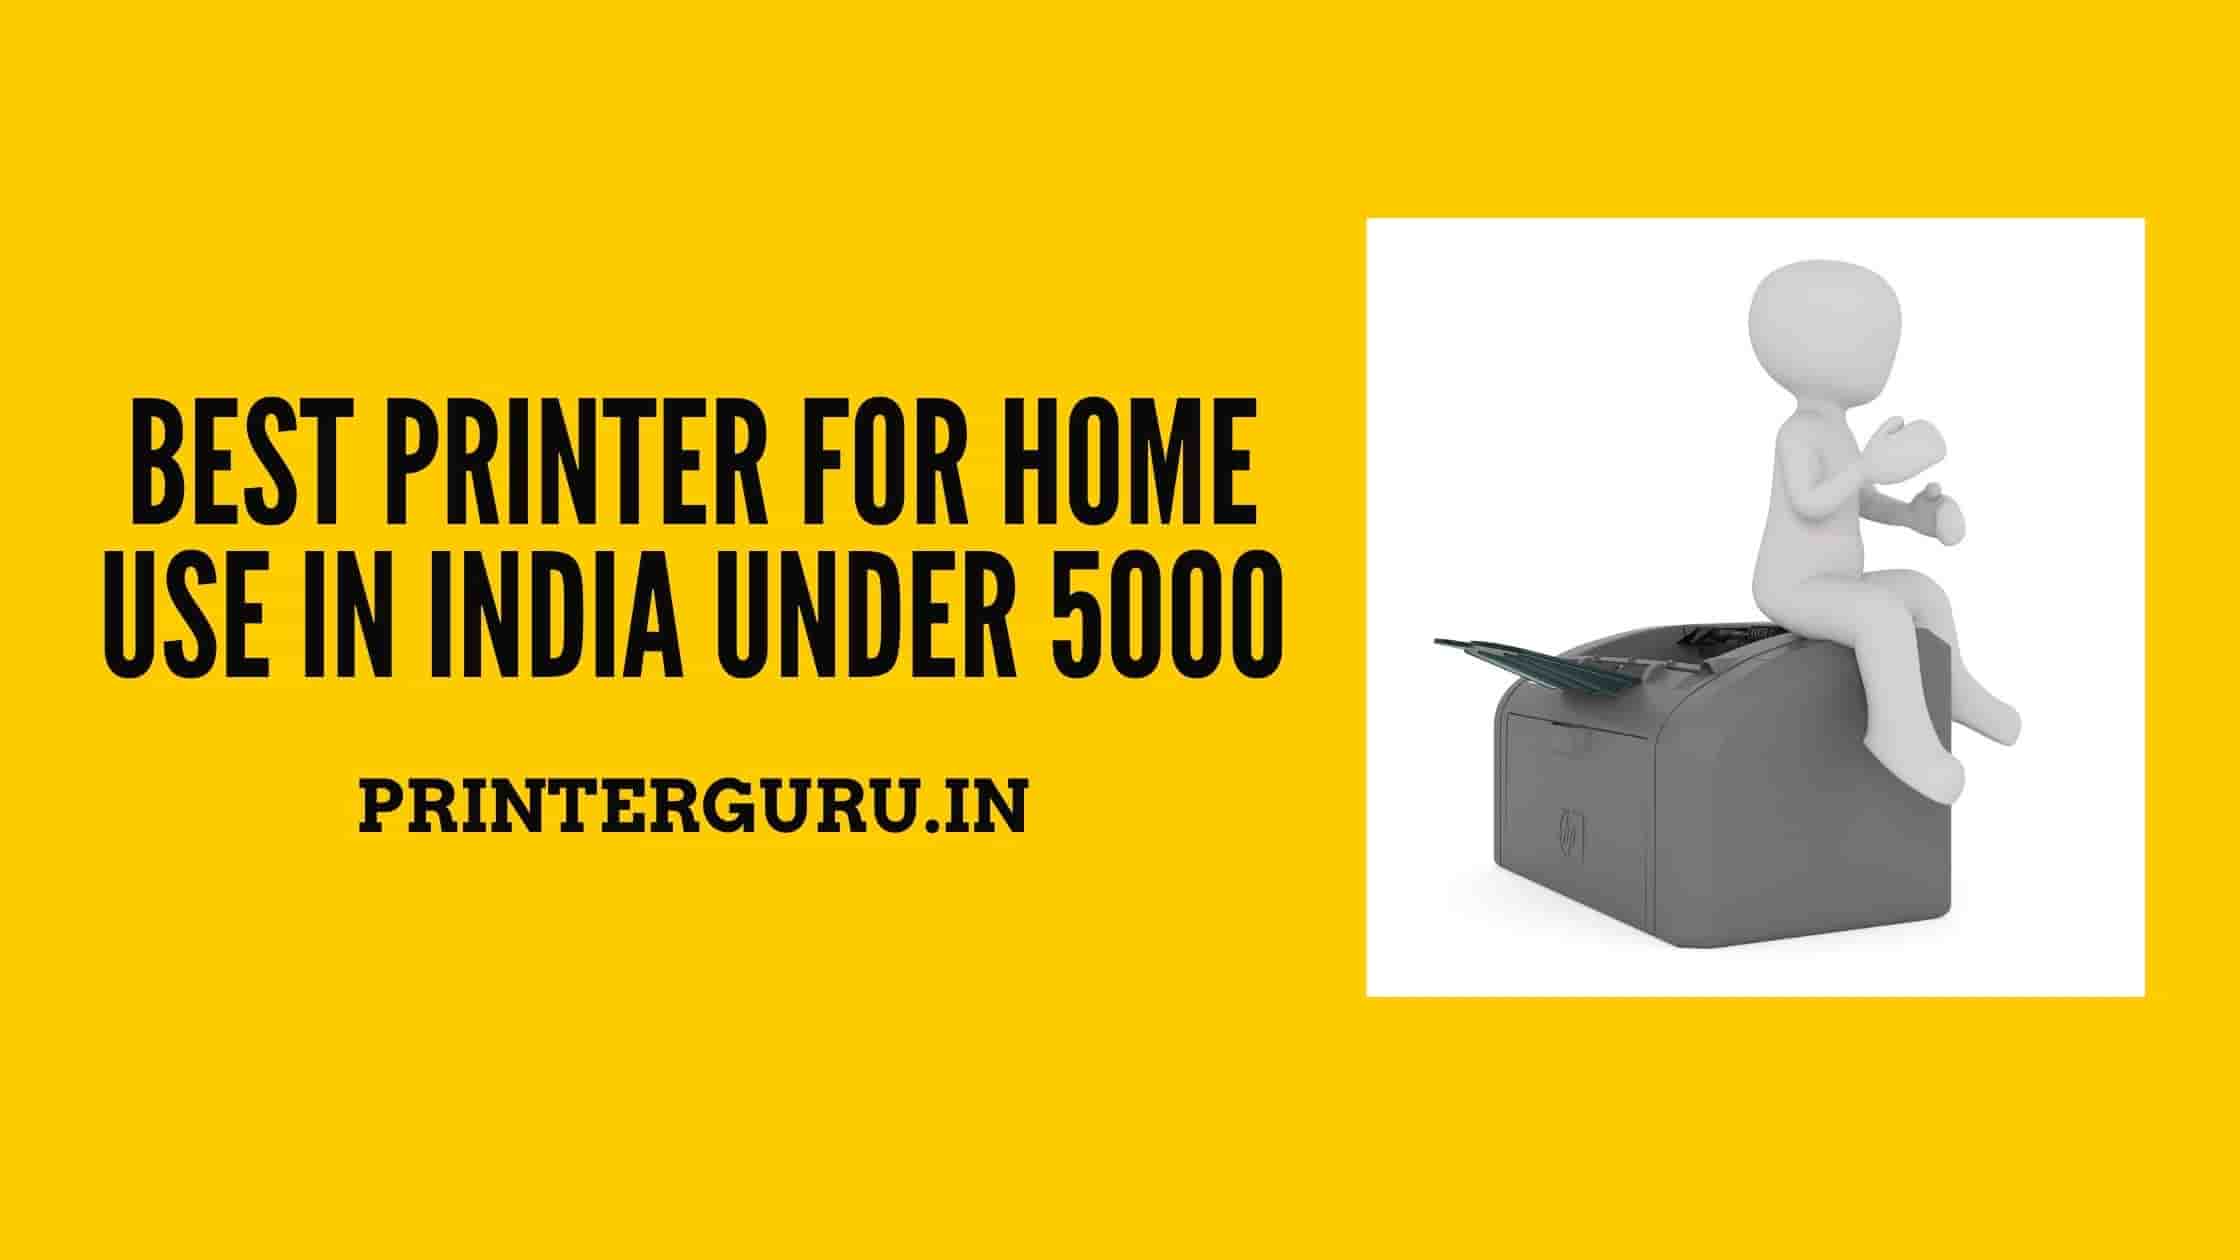 Best Printer for Home Use In India Under 5000 Rupees